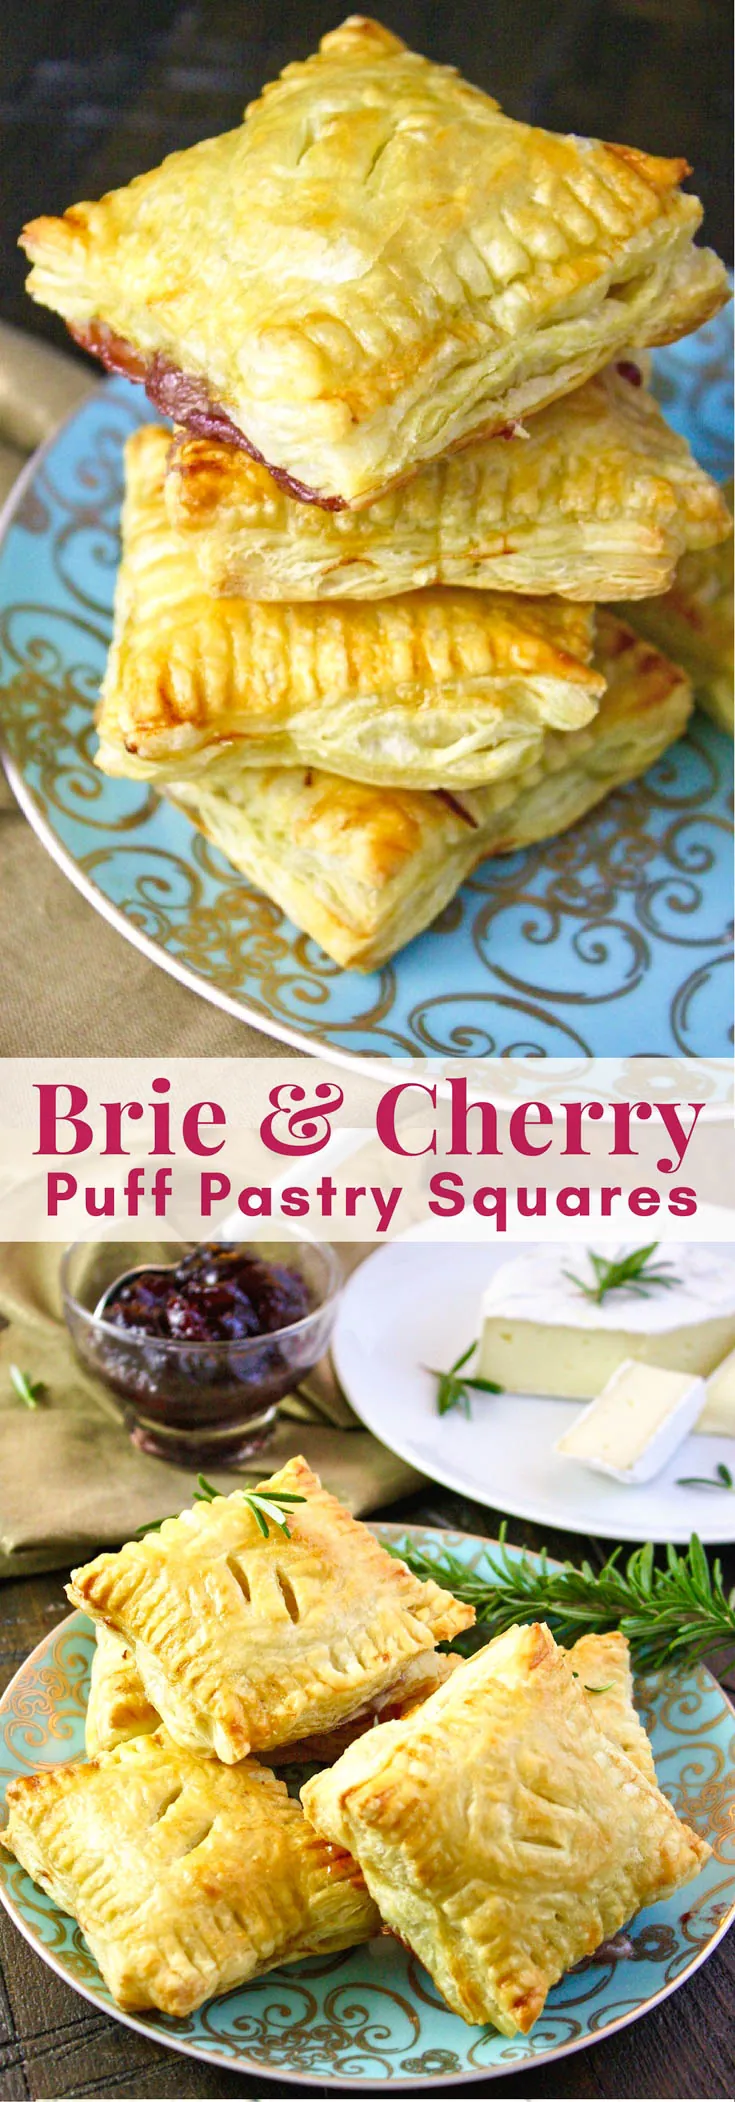 Easy Brie and Cherry Puff Pastry Squares make an elegant and easy-to-make appetizer. This is a great appetizer to make, just in time for the holidays!